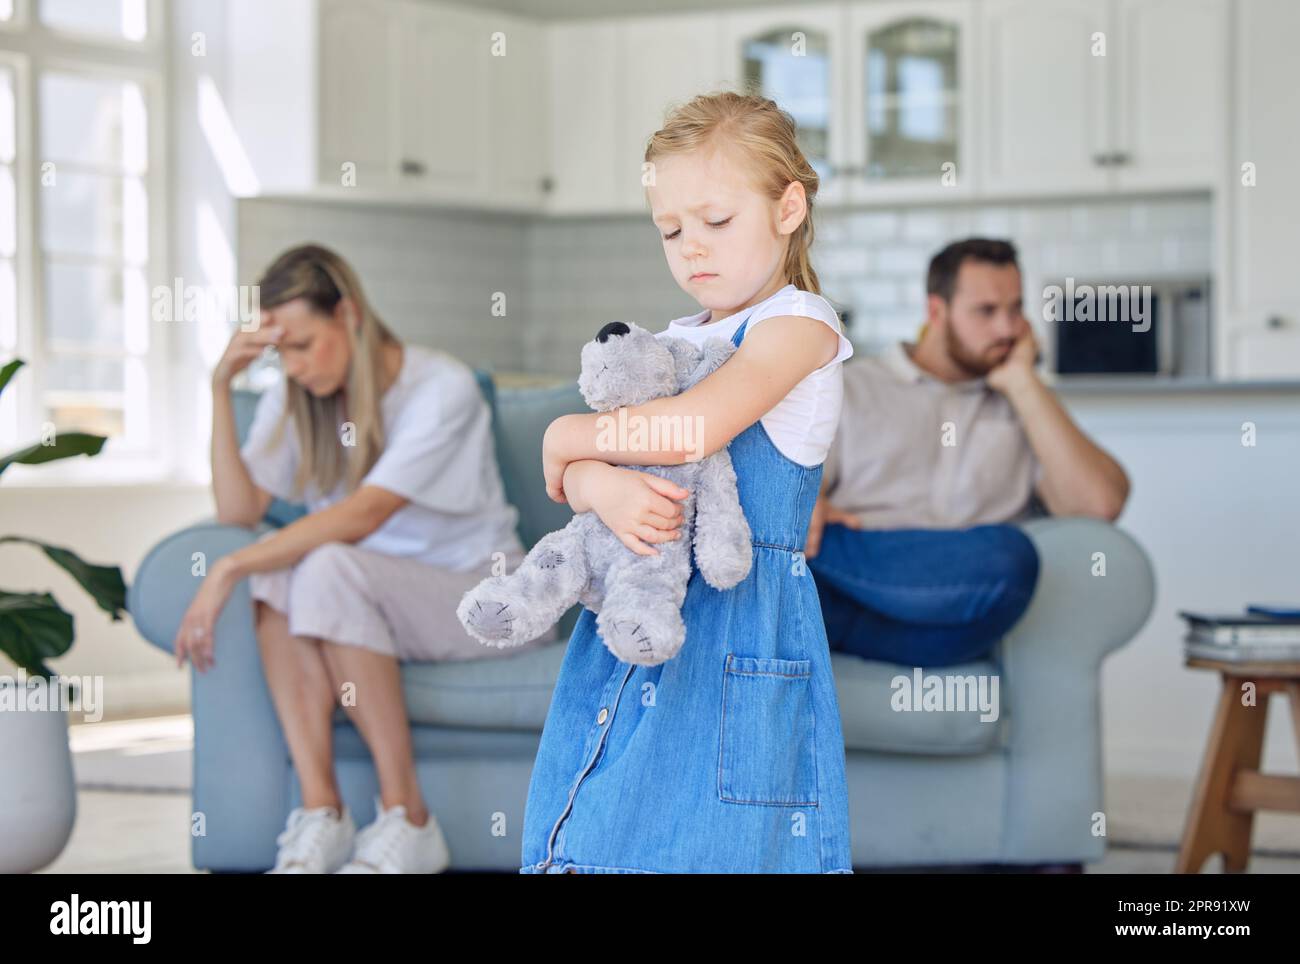 An upset little girl squeezing her teddy bear while looking sad and depressed while her parents argue in the background. Thinking about her parents breaking up or getting divorced is causing stress Stock Photo